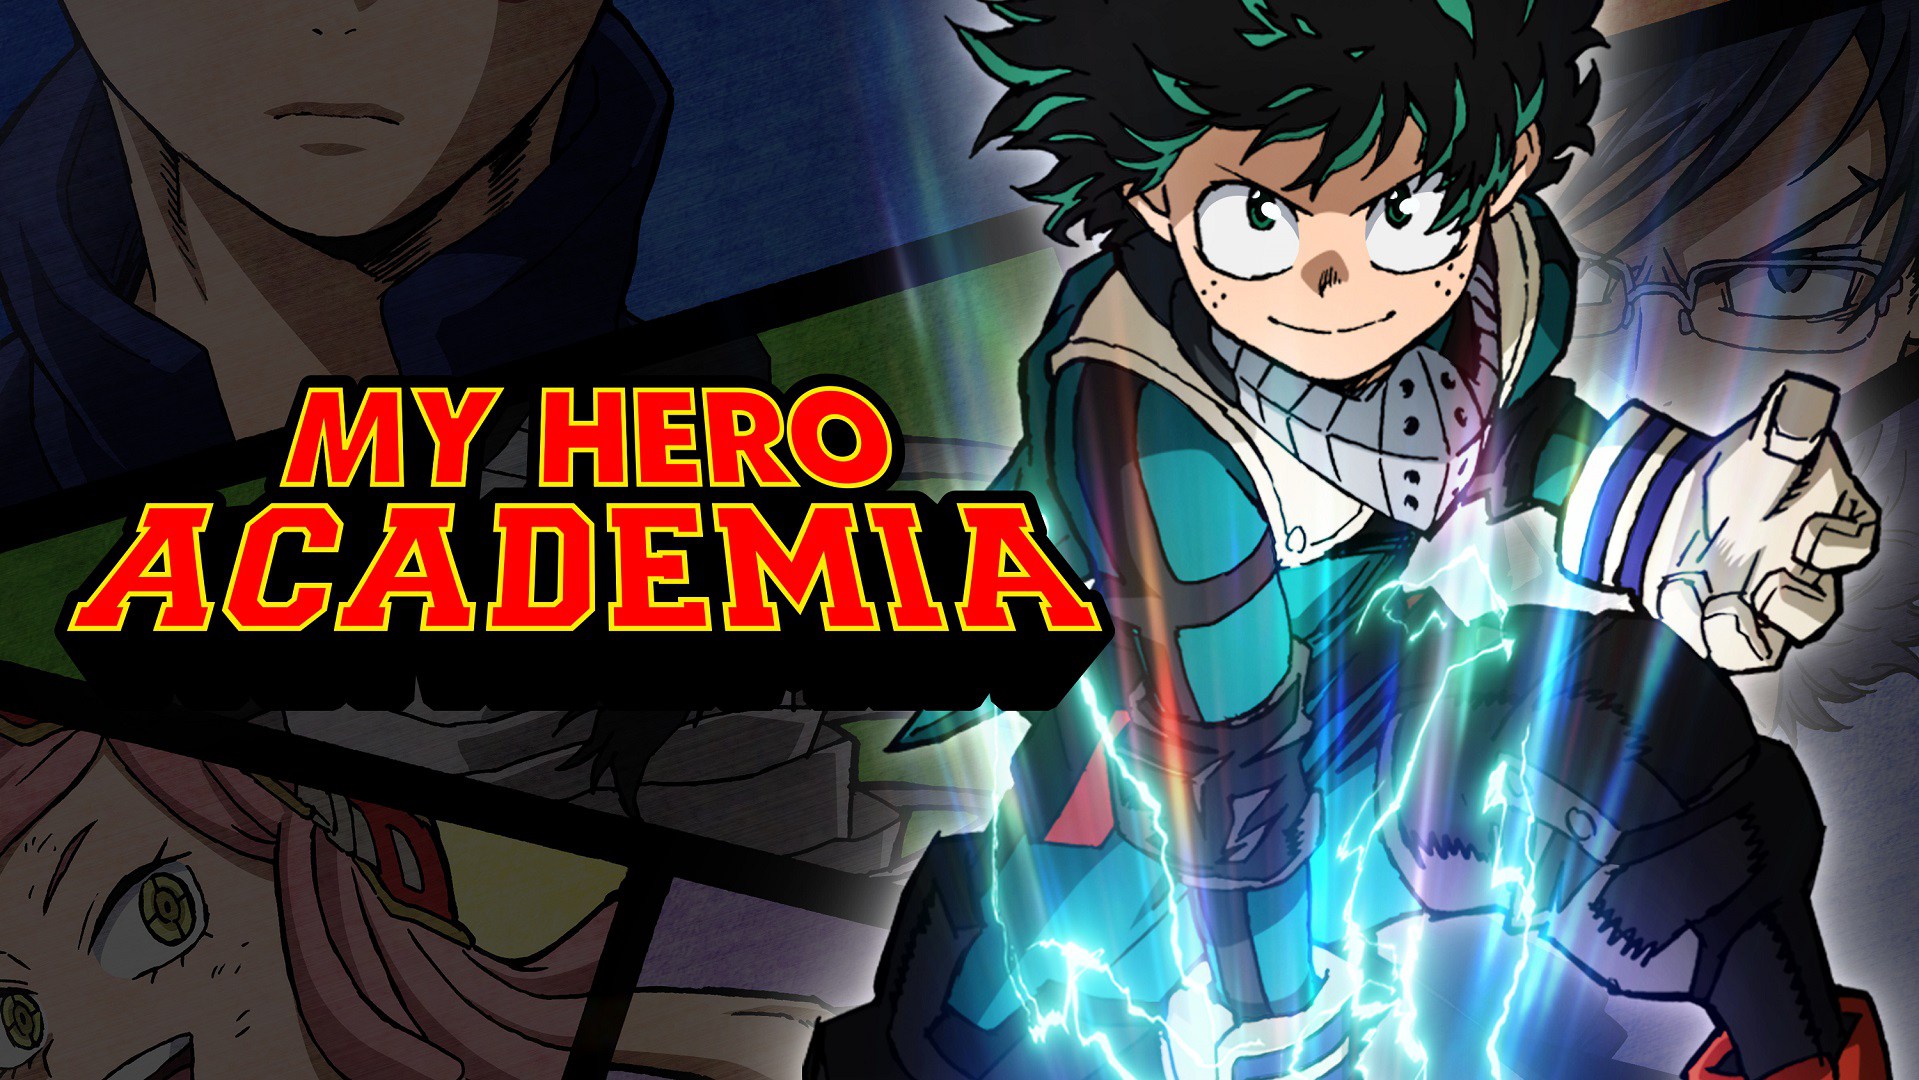 Funimation will Air English Dubbed ‘My Hero Academia’ Simultaneously with Japan For First 6 Episodes